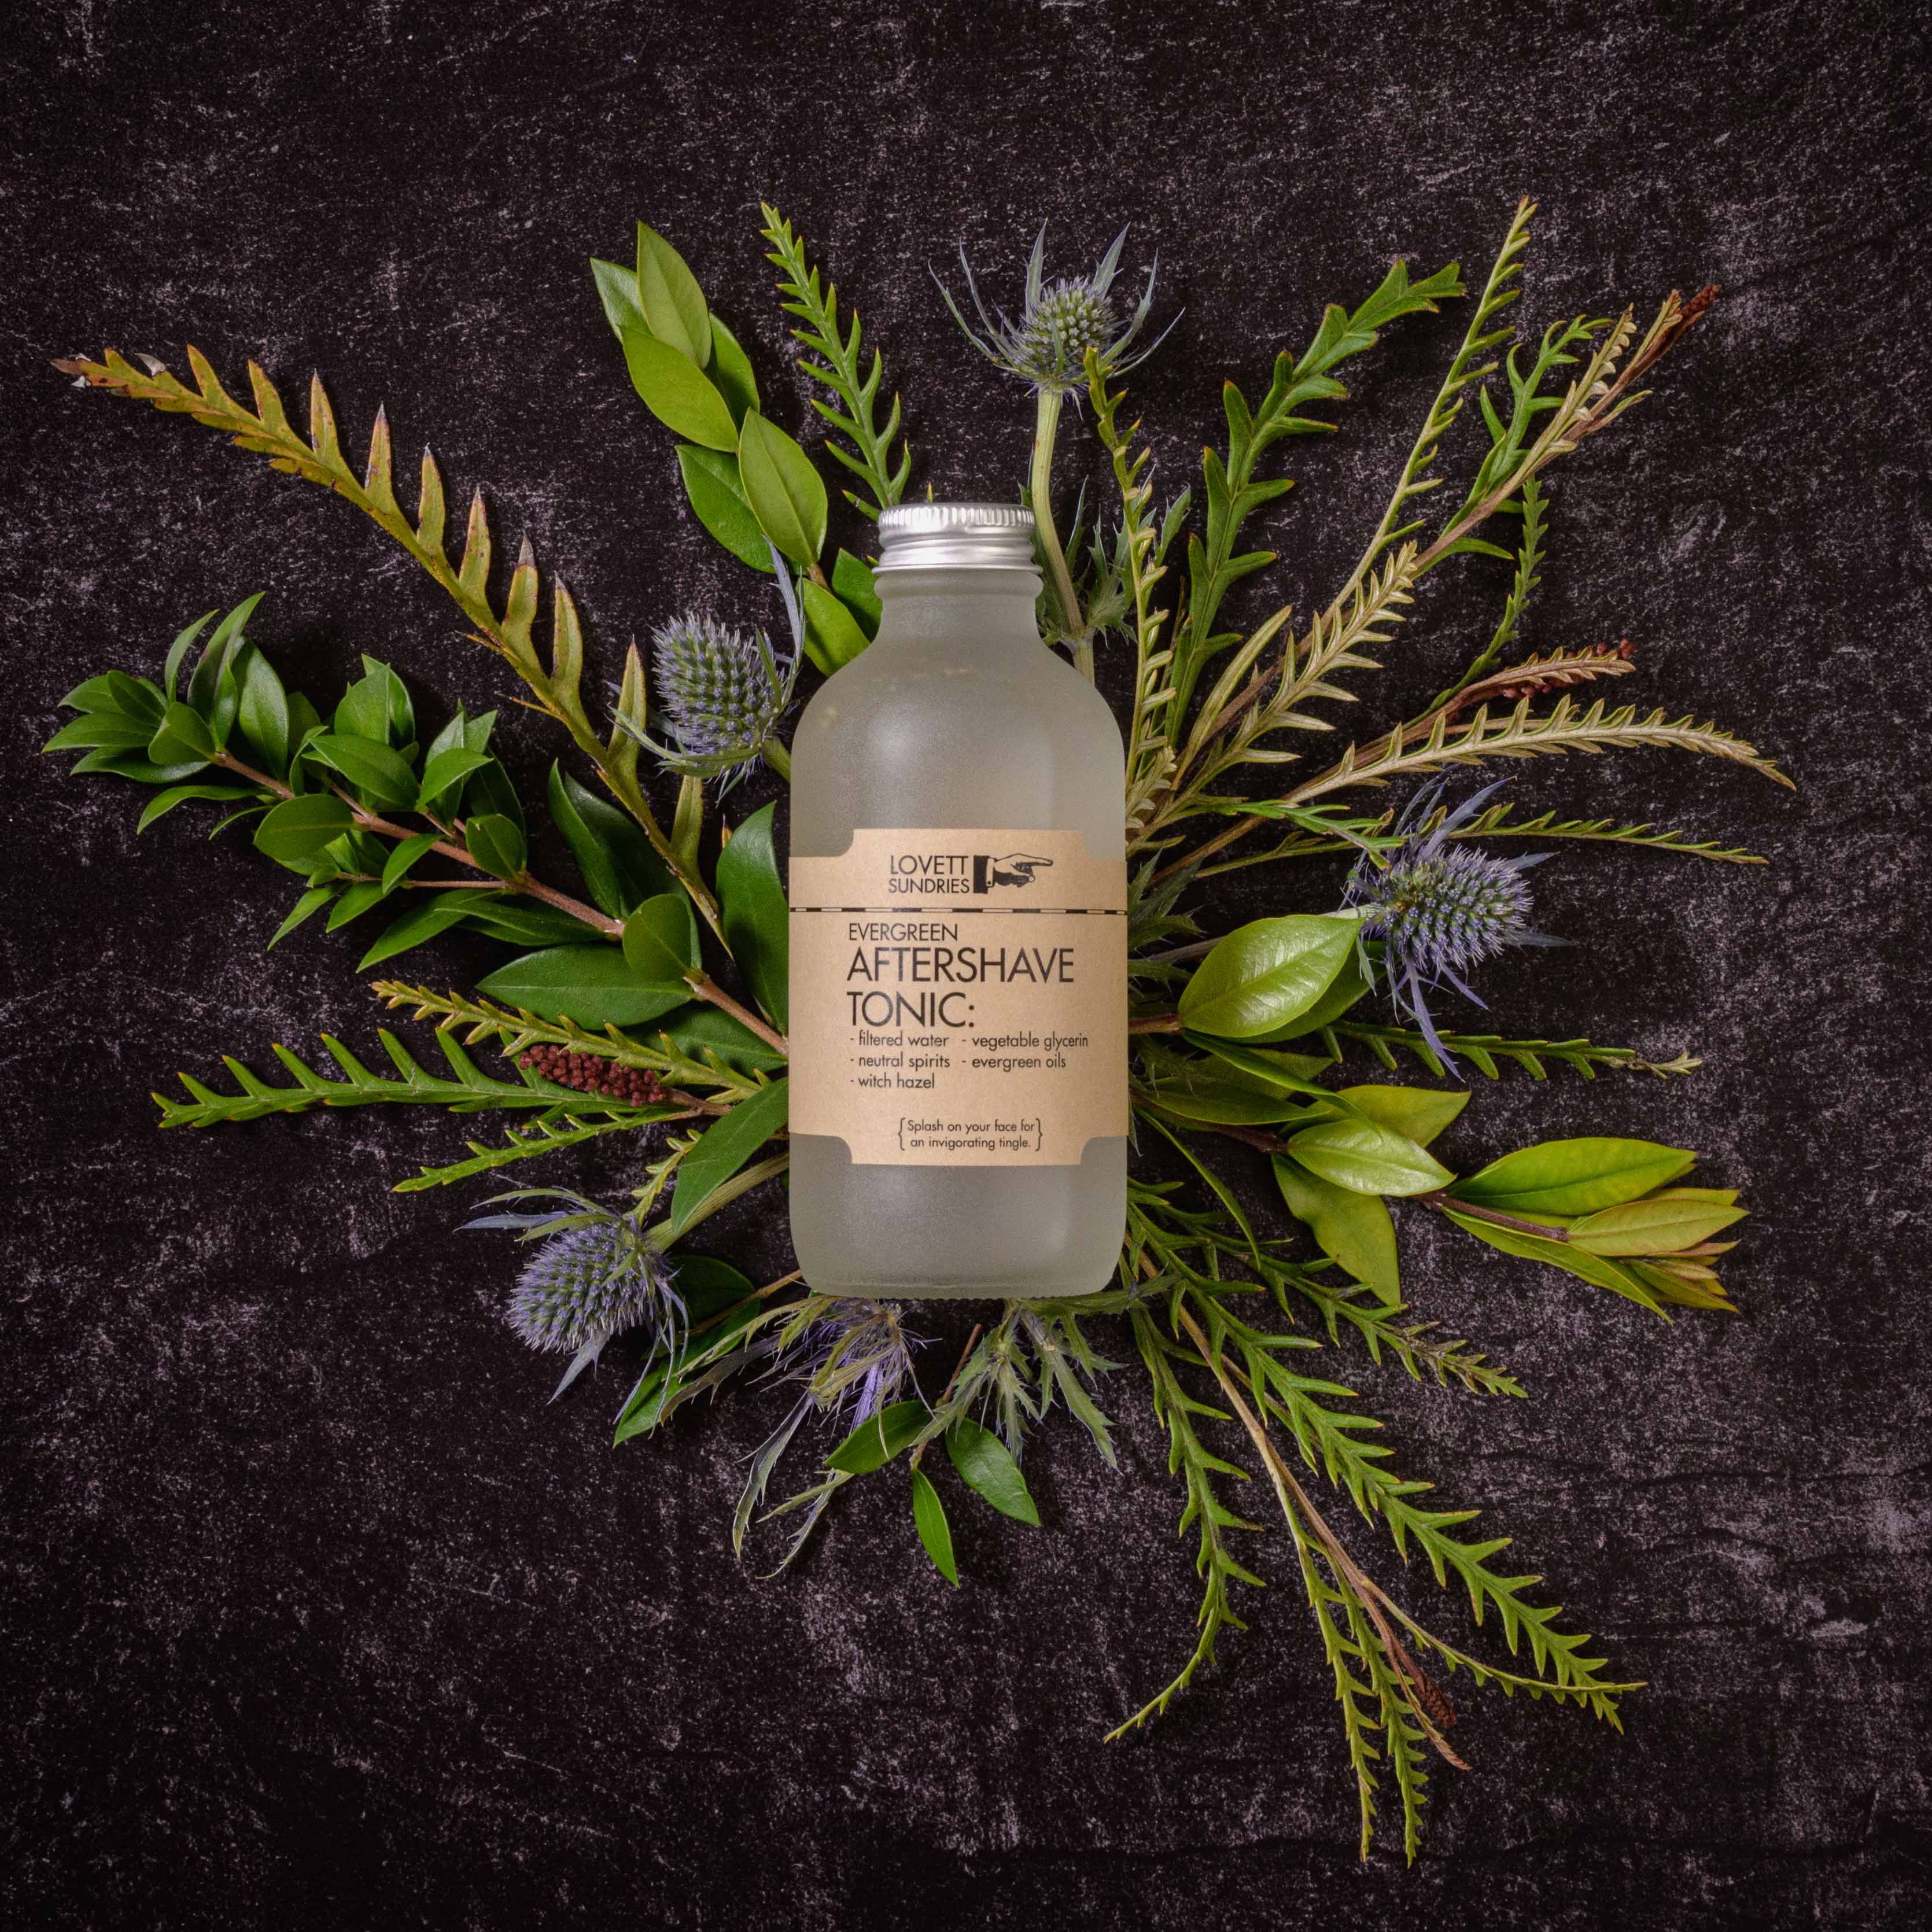 A bottle of evergreen scented aftershave tonic on top of plants.